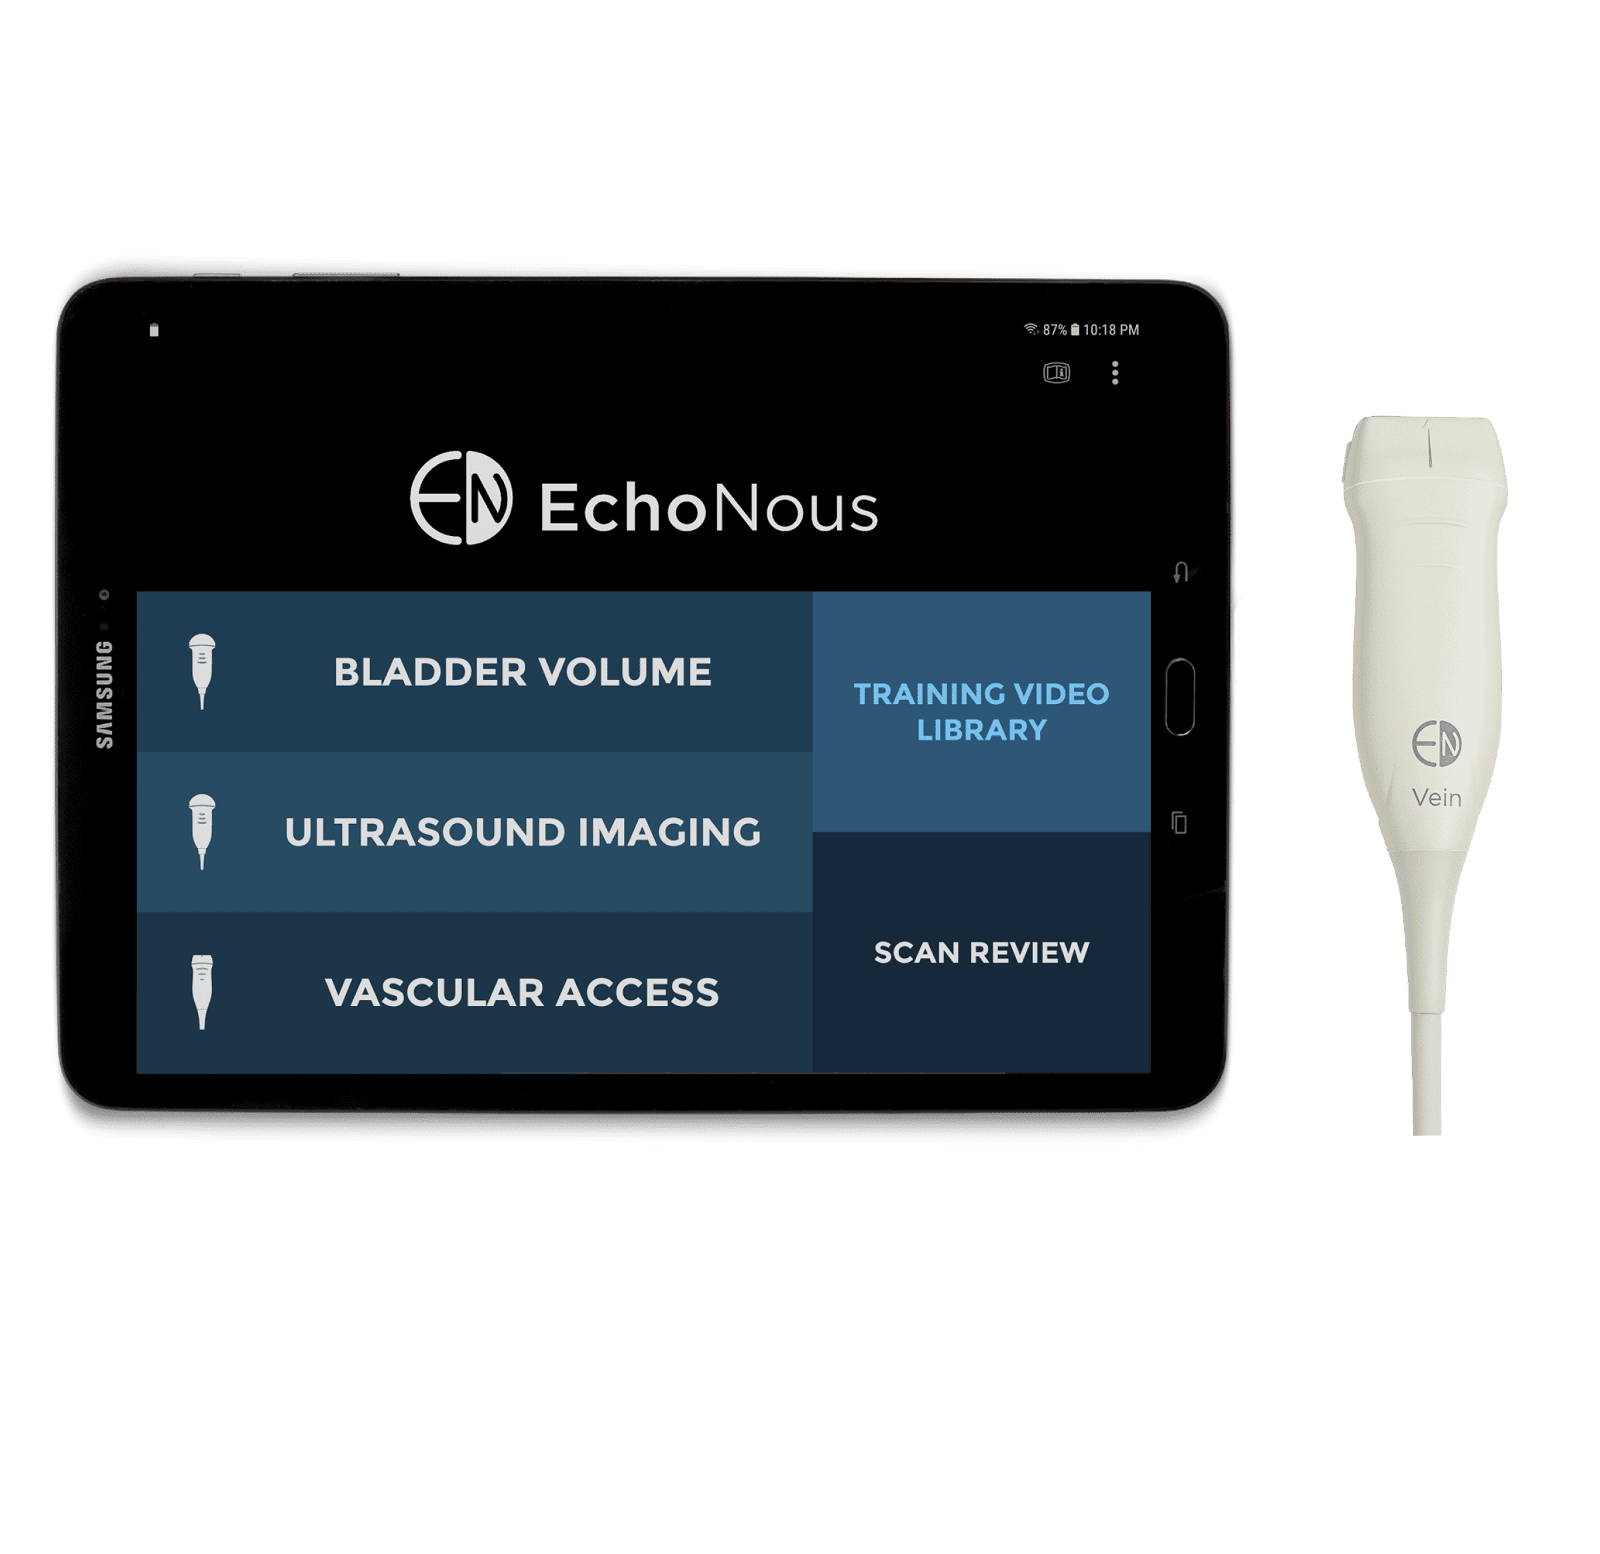 EchoNous Vein- Ultrasound guidance designed for pheripheral IV placement